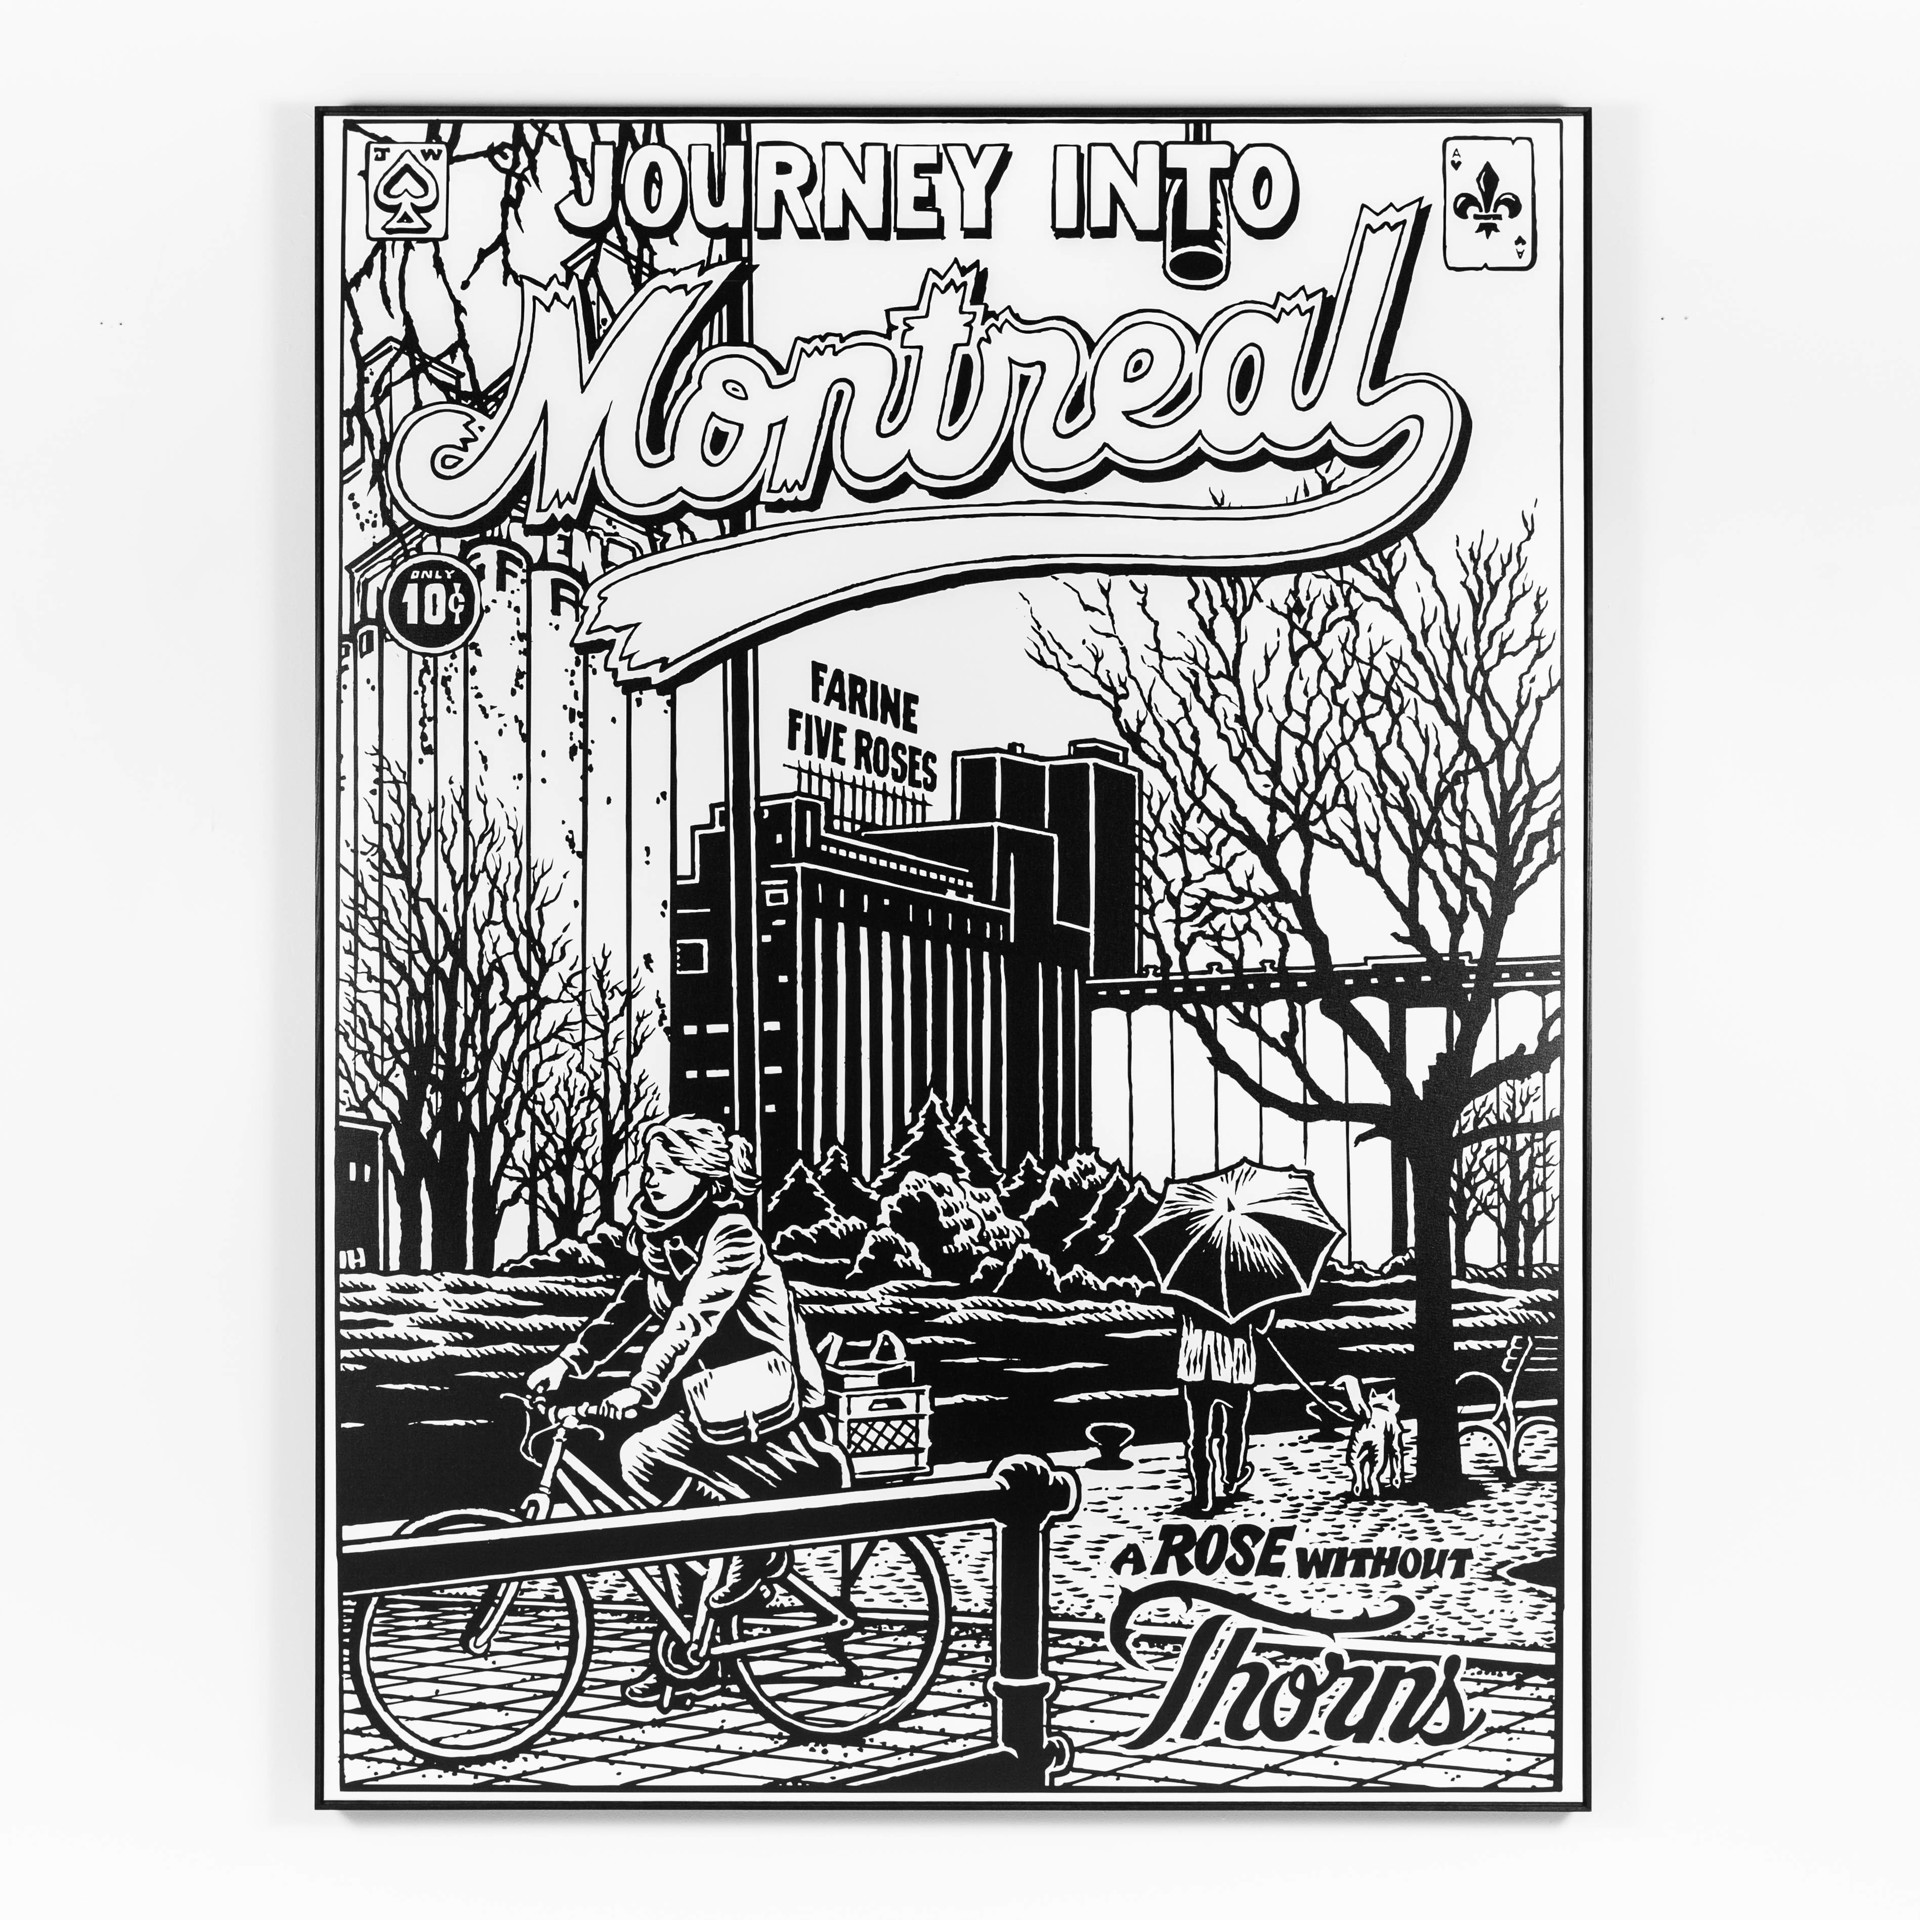 Journey Into Montreal - Five Roses, on canvas by Jason Wasserman